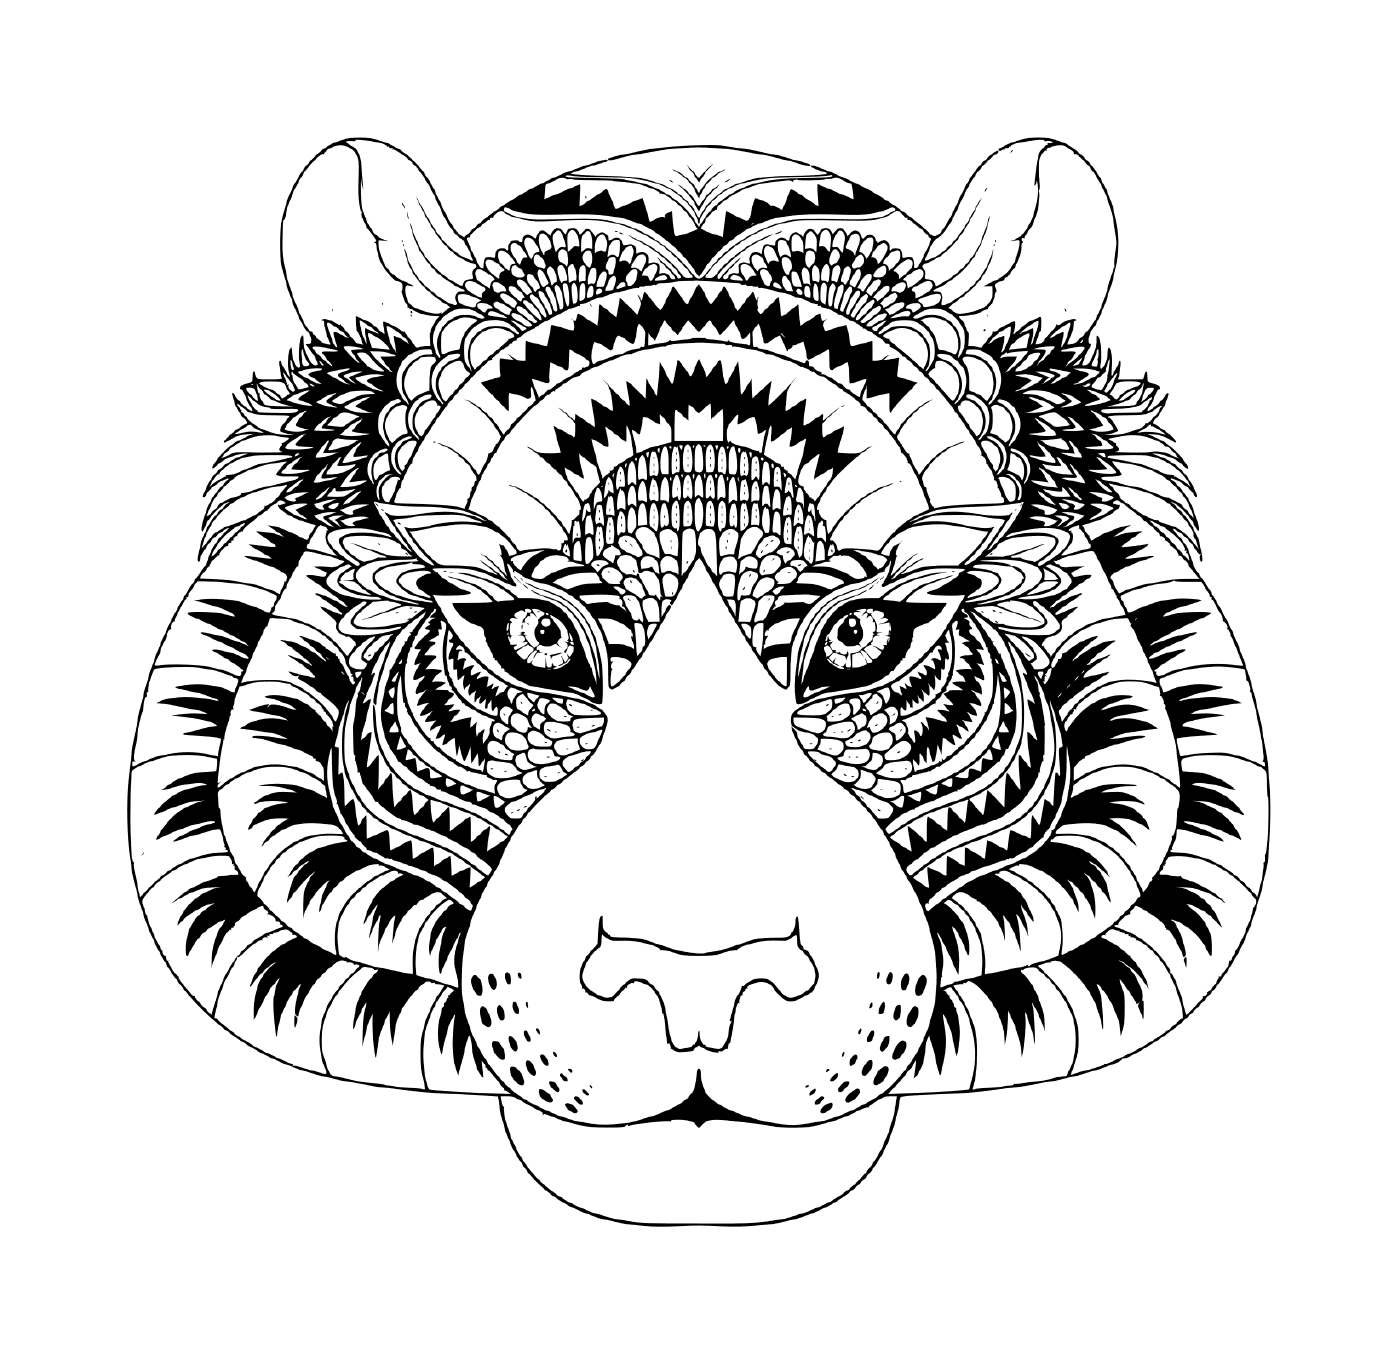  A tiger with zentangle details 